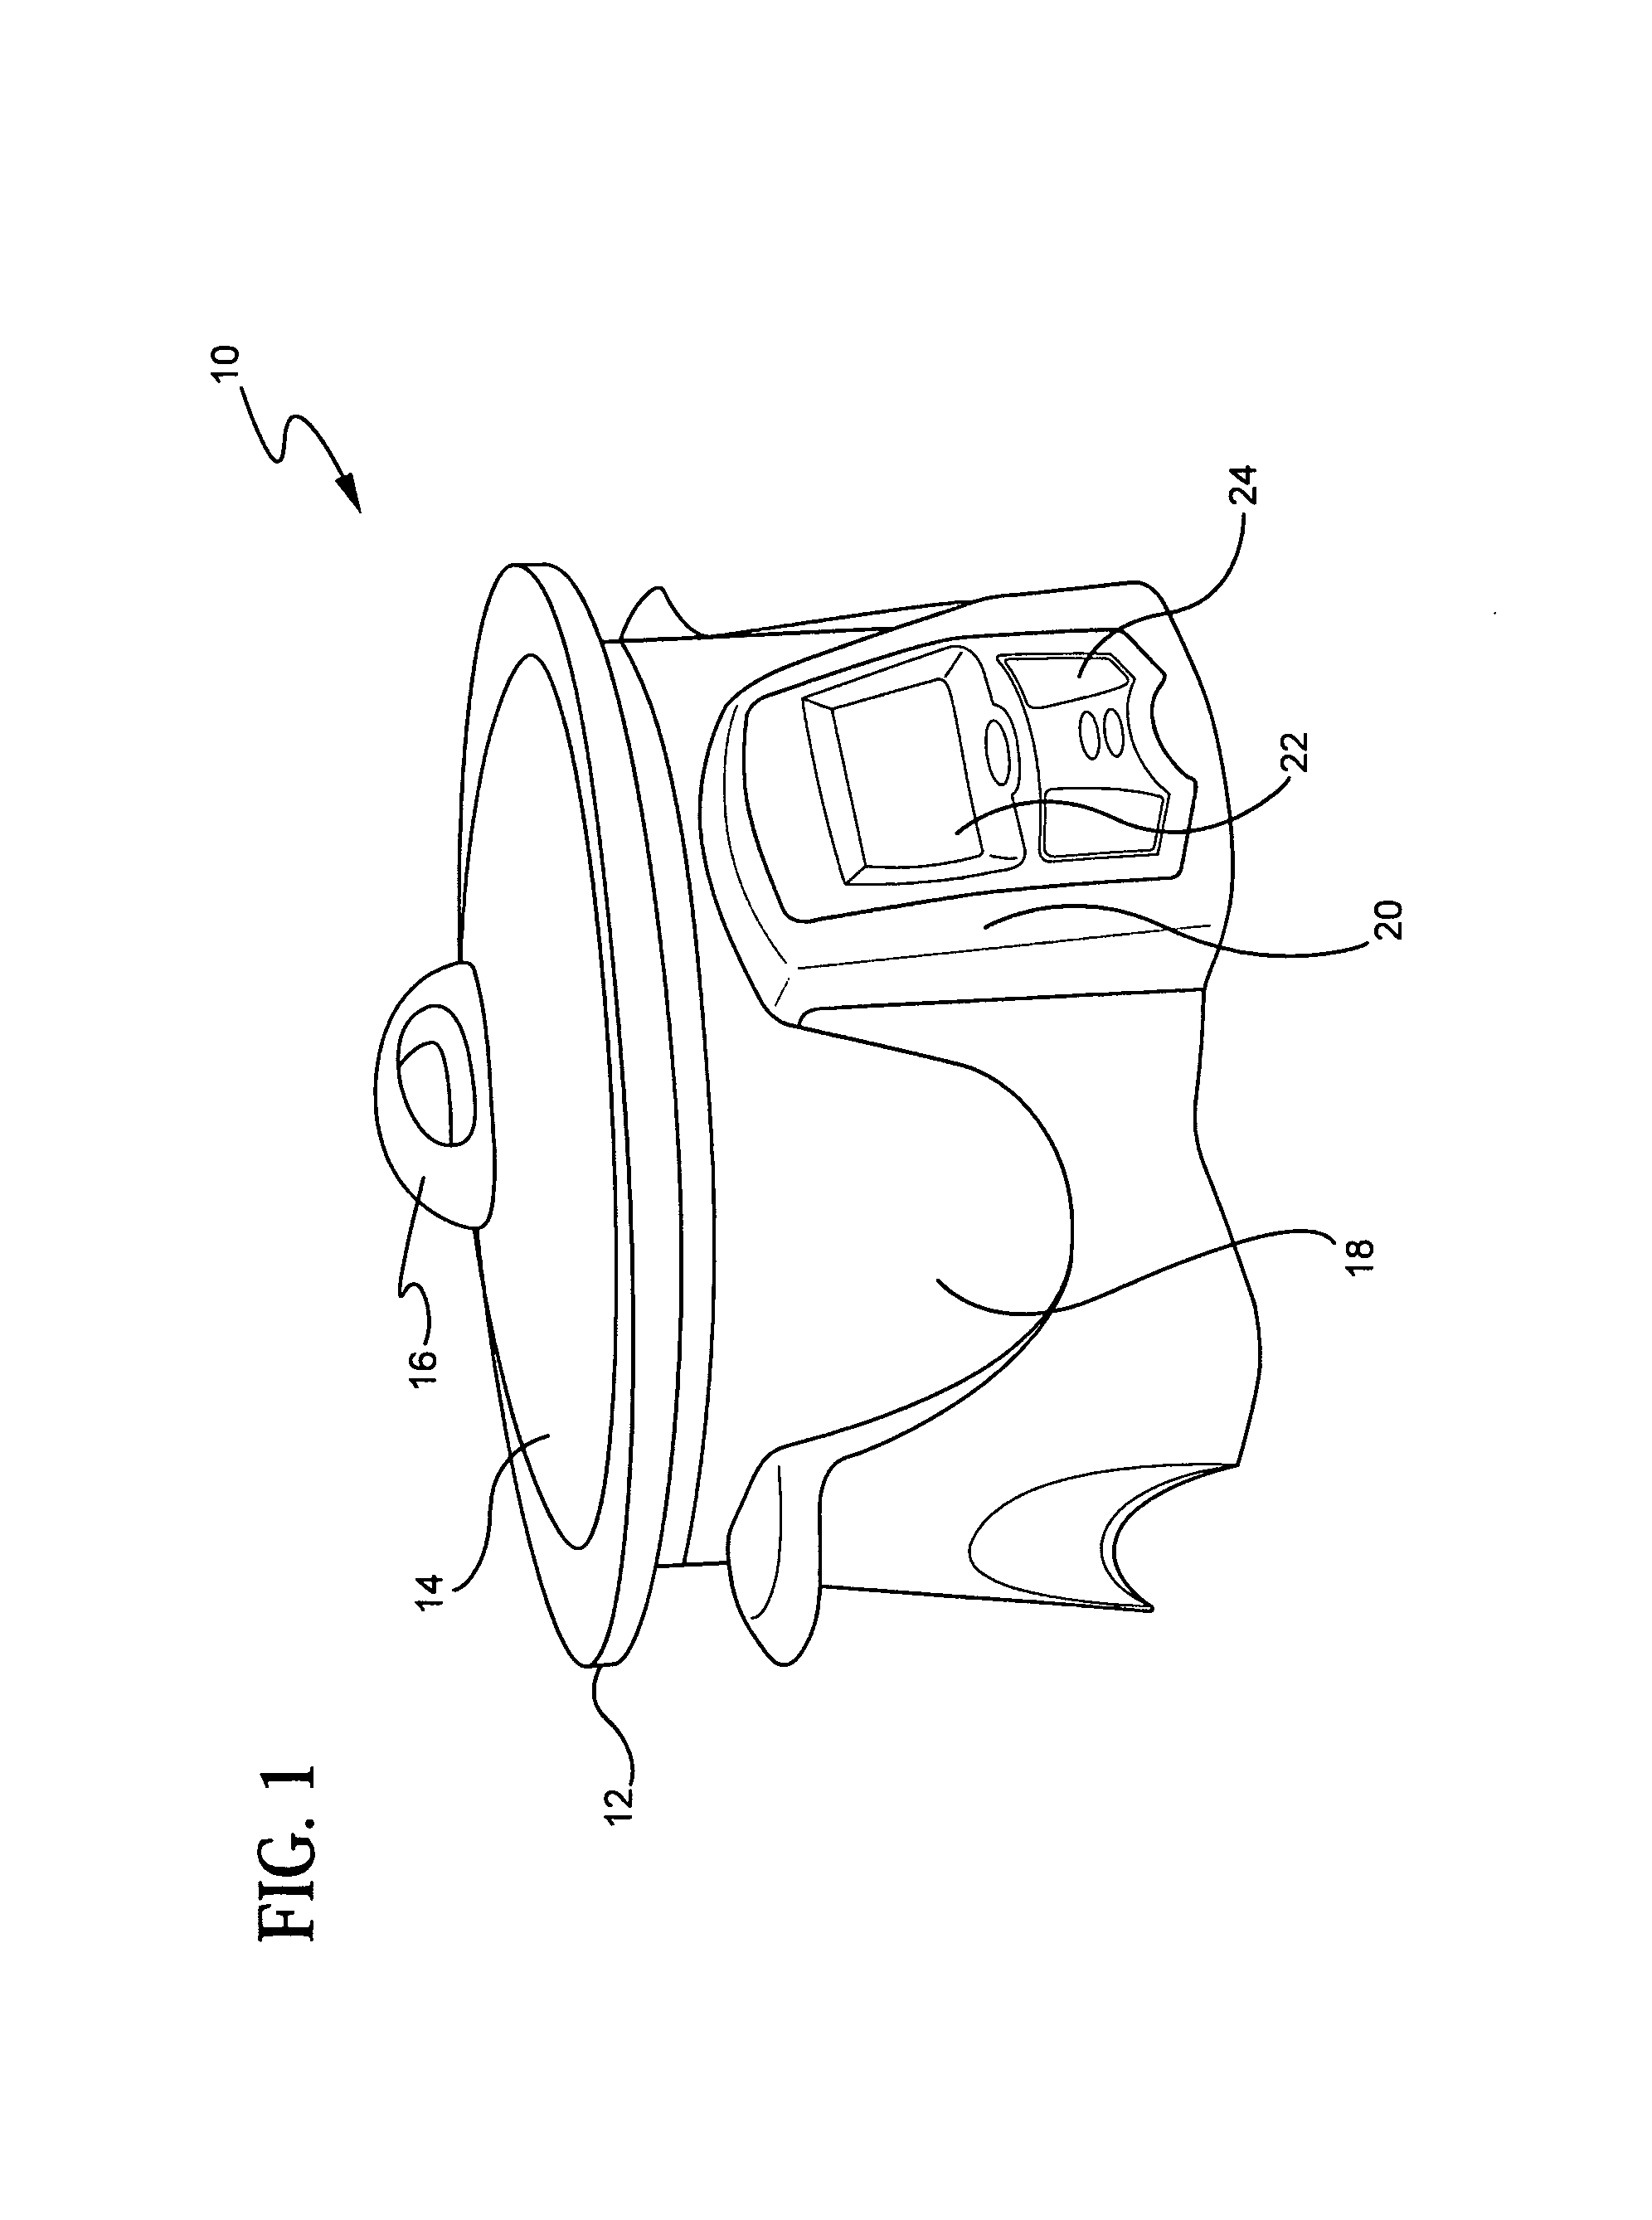 Cooking apparatus with electronic recipe display